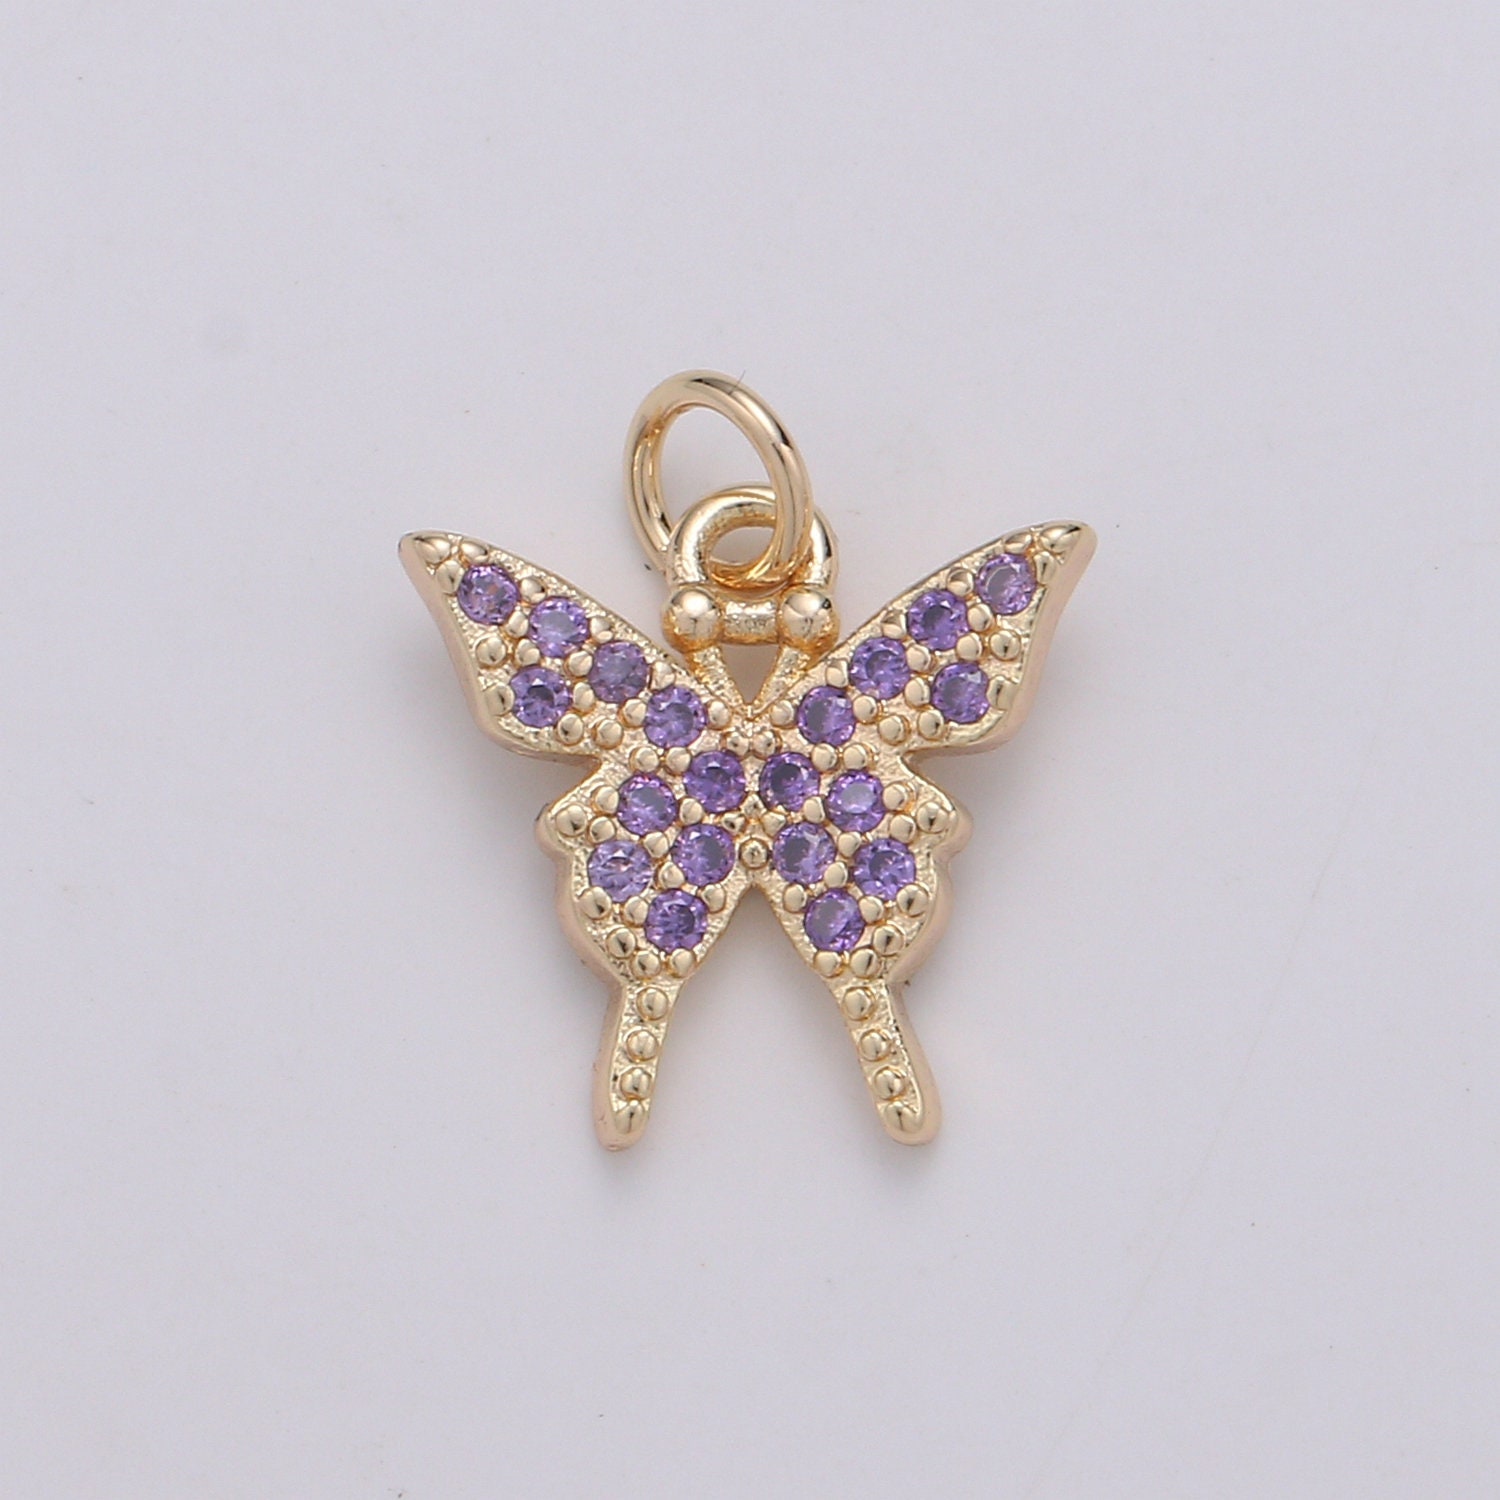 Dainty 18K Gold Plated Micro Pave Monarch Butterfly Charm - Etsy